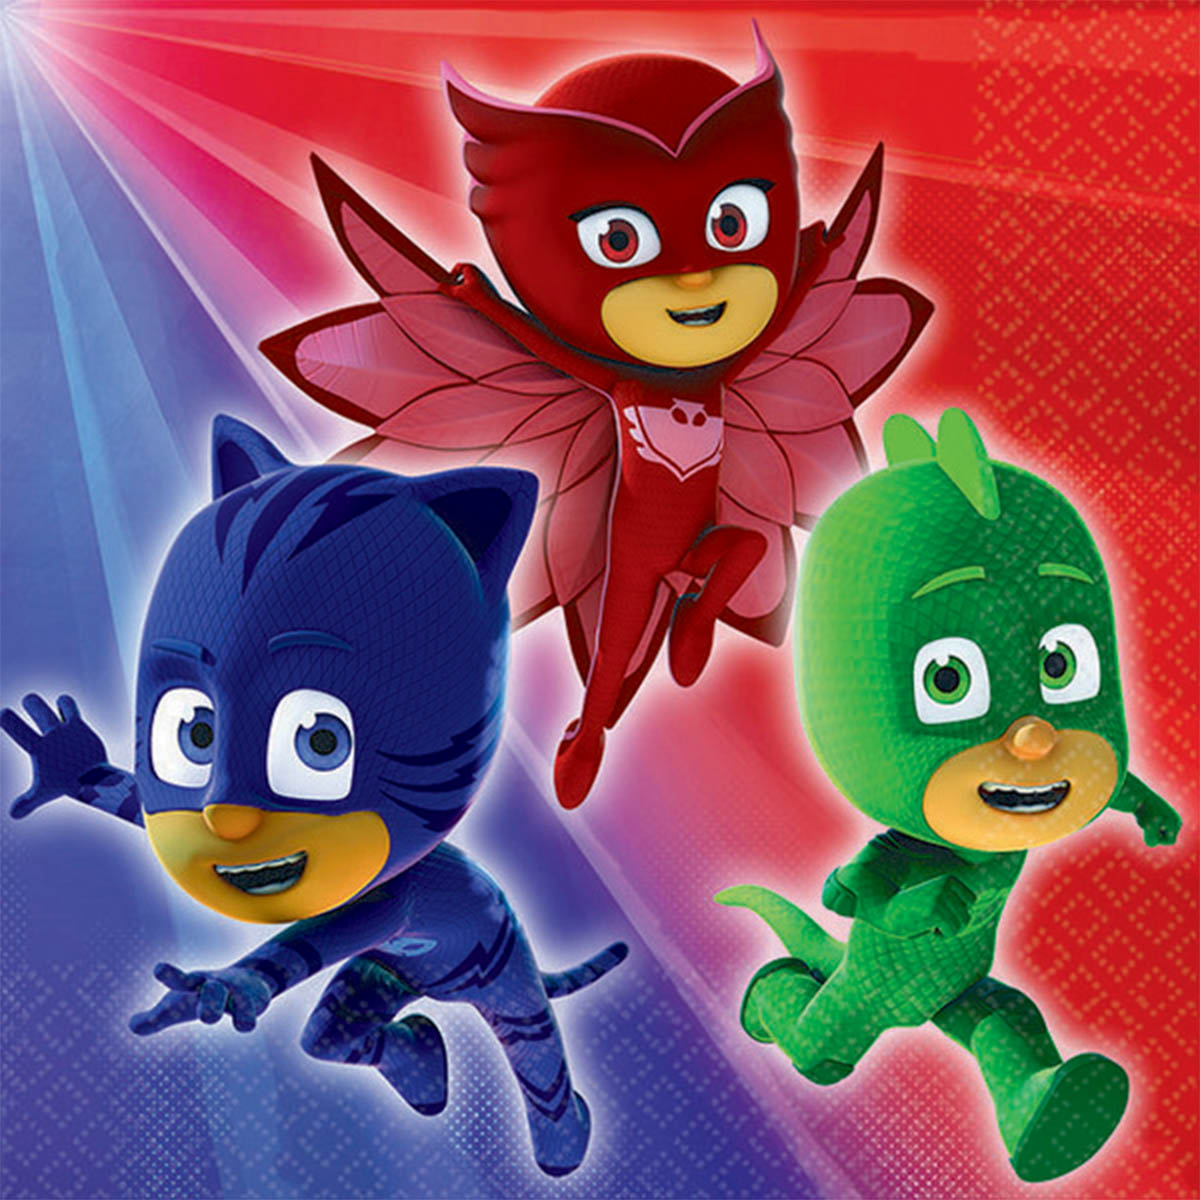 Transform your event into a heroic adventure with Party Empress' PJ Masks Party Collection!